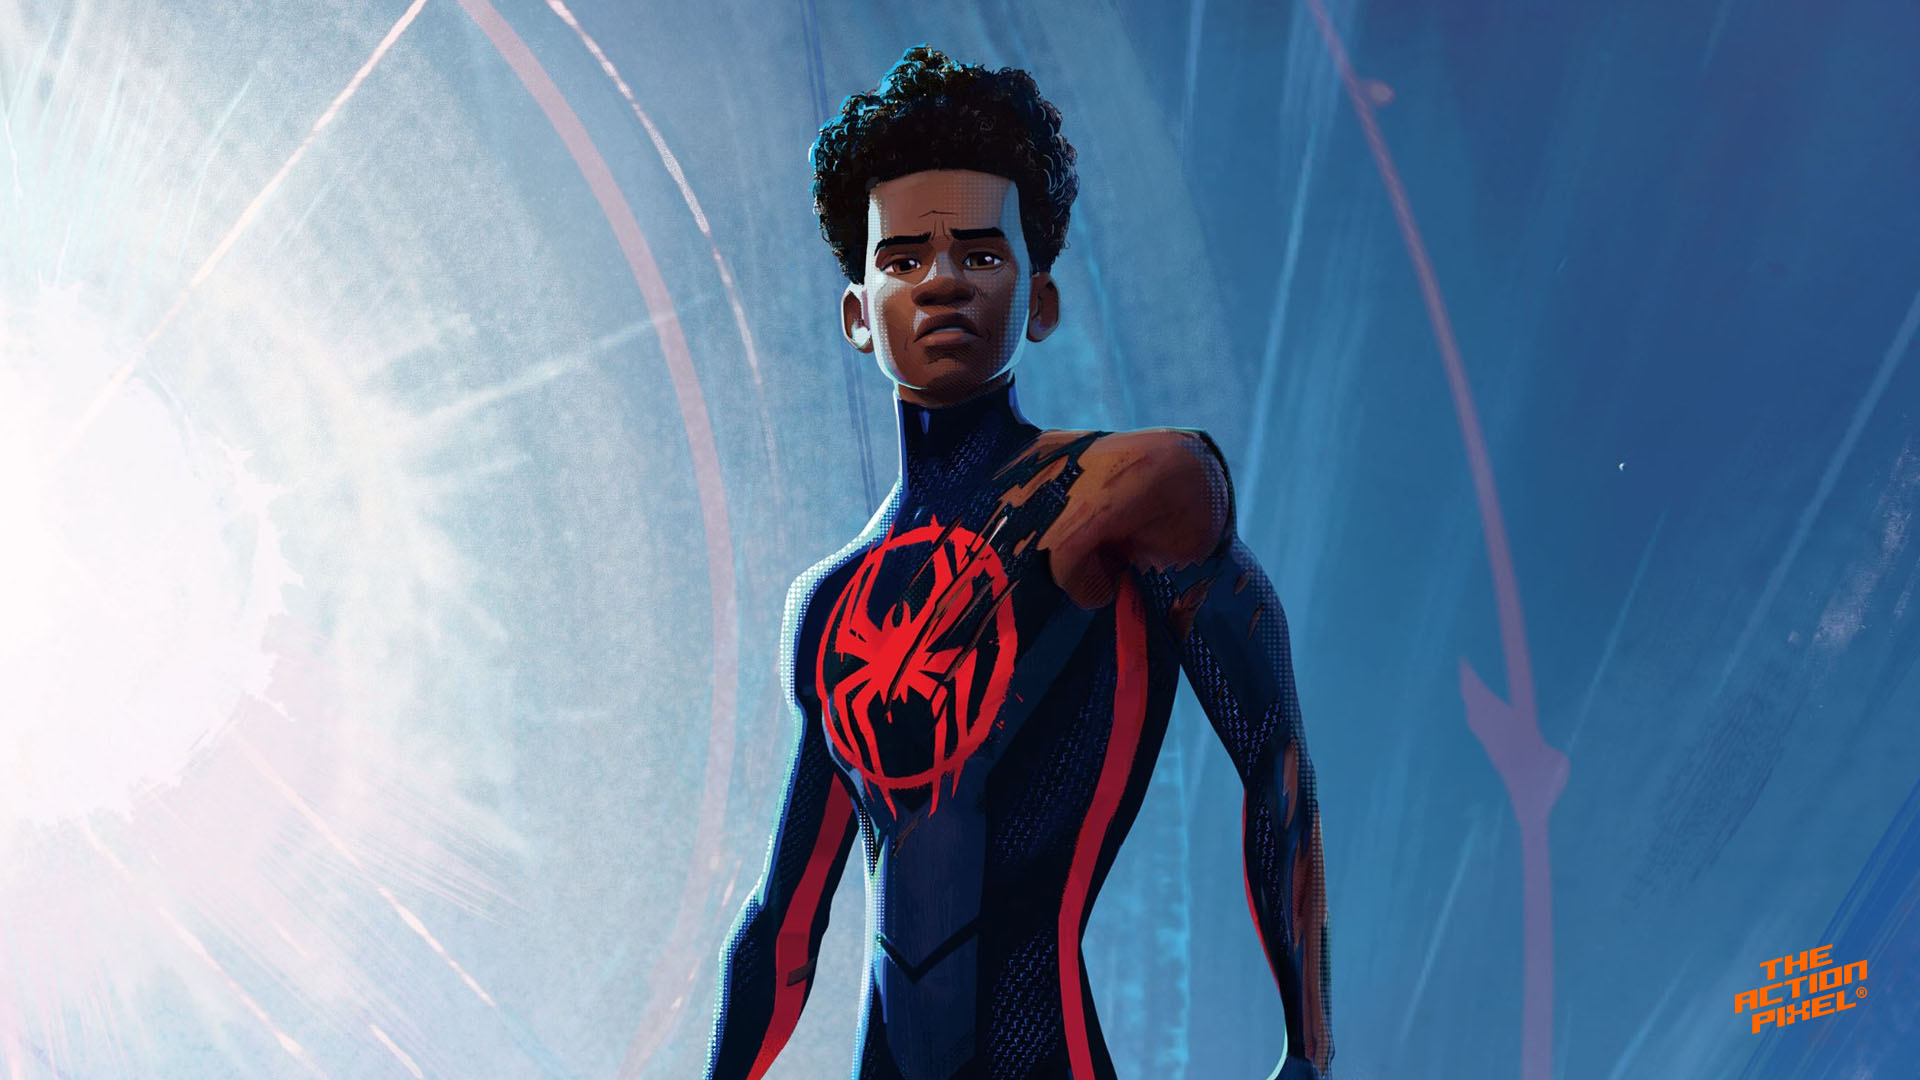 spider-man: across the spider-verse, spiderman across the spiderverse, spider-verse, miles morales, spider-verse posters, spider-cat, gwen, miles, spider-punk, jessica drew, entertainment on tap , the action pixel, featured,